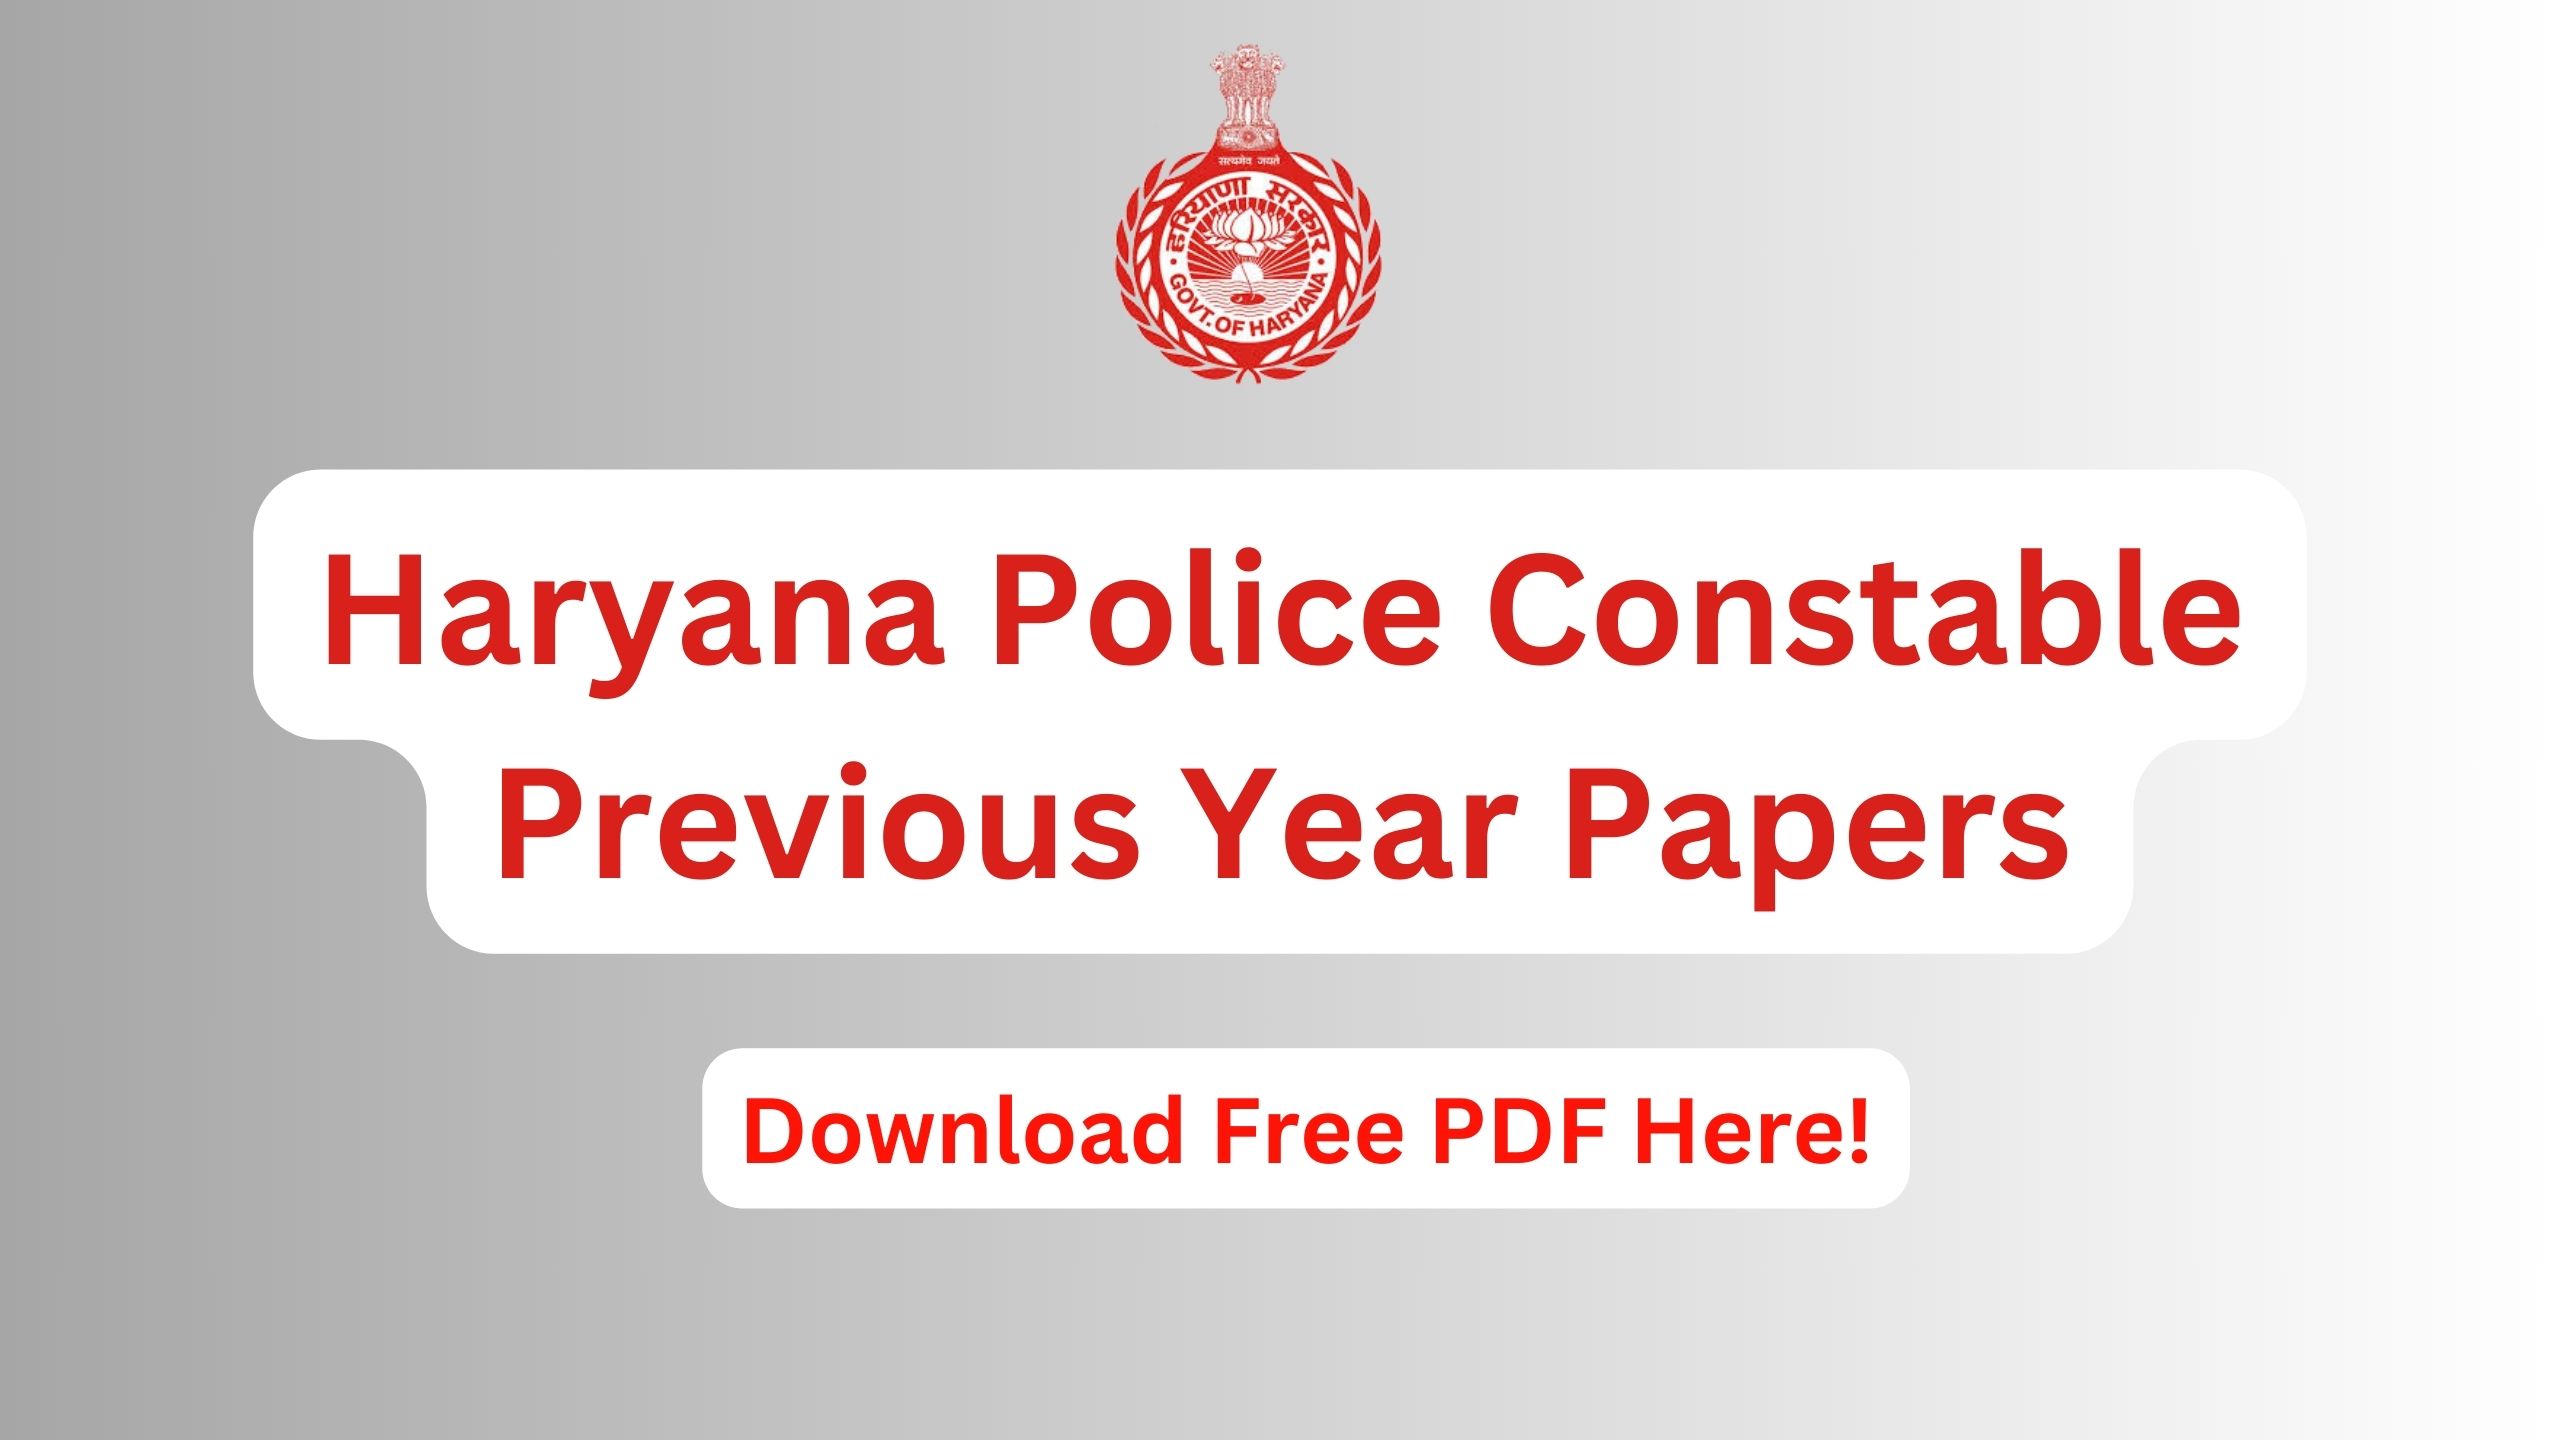 Haryana Police Constable Previous Year Papers